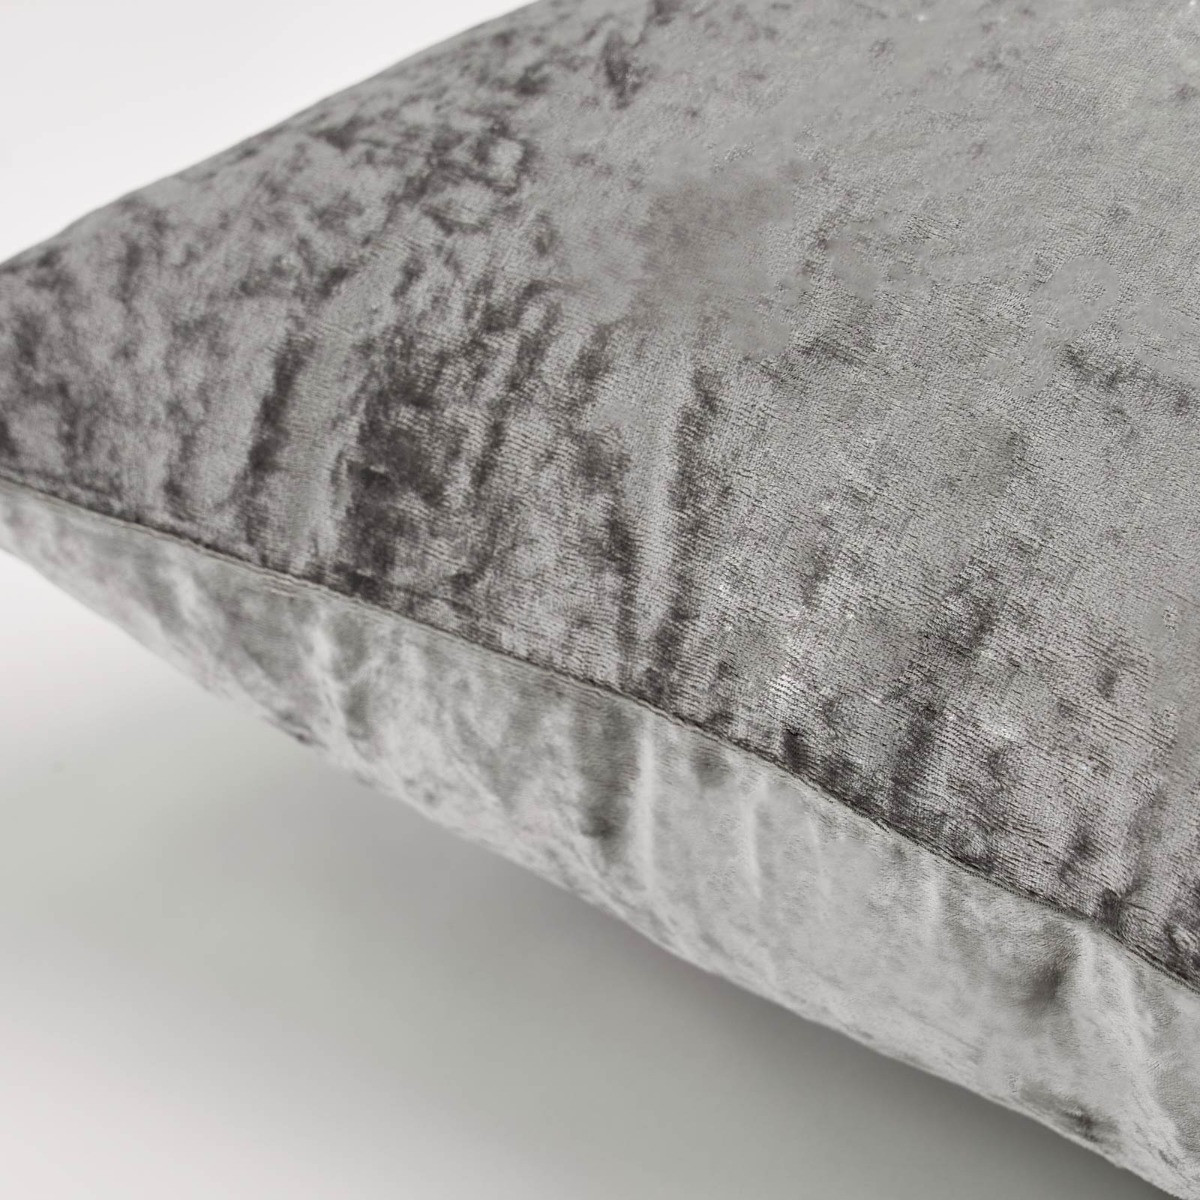 Sienna Crushed Velvet 2 Pack Cushion Covers - Silver>